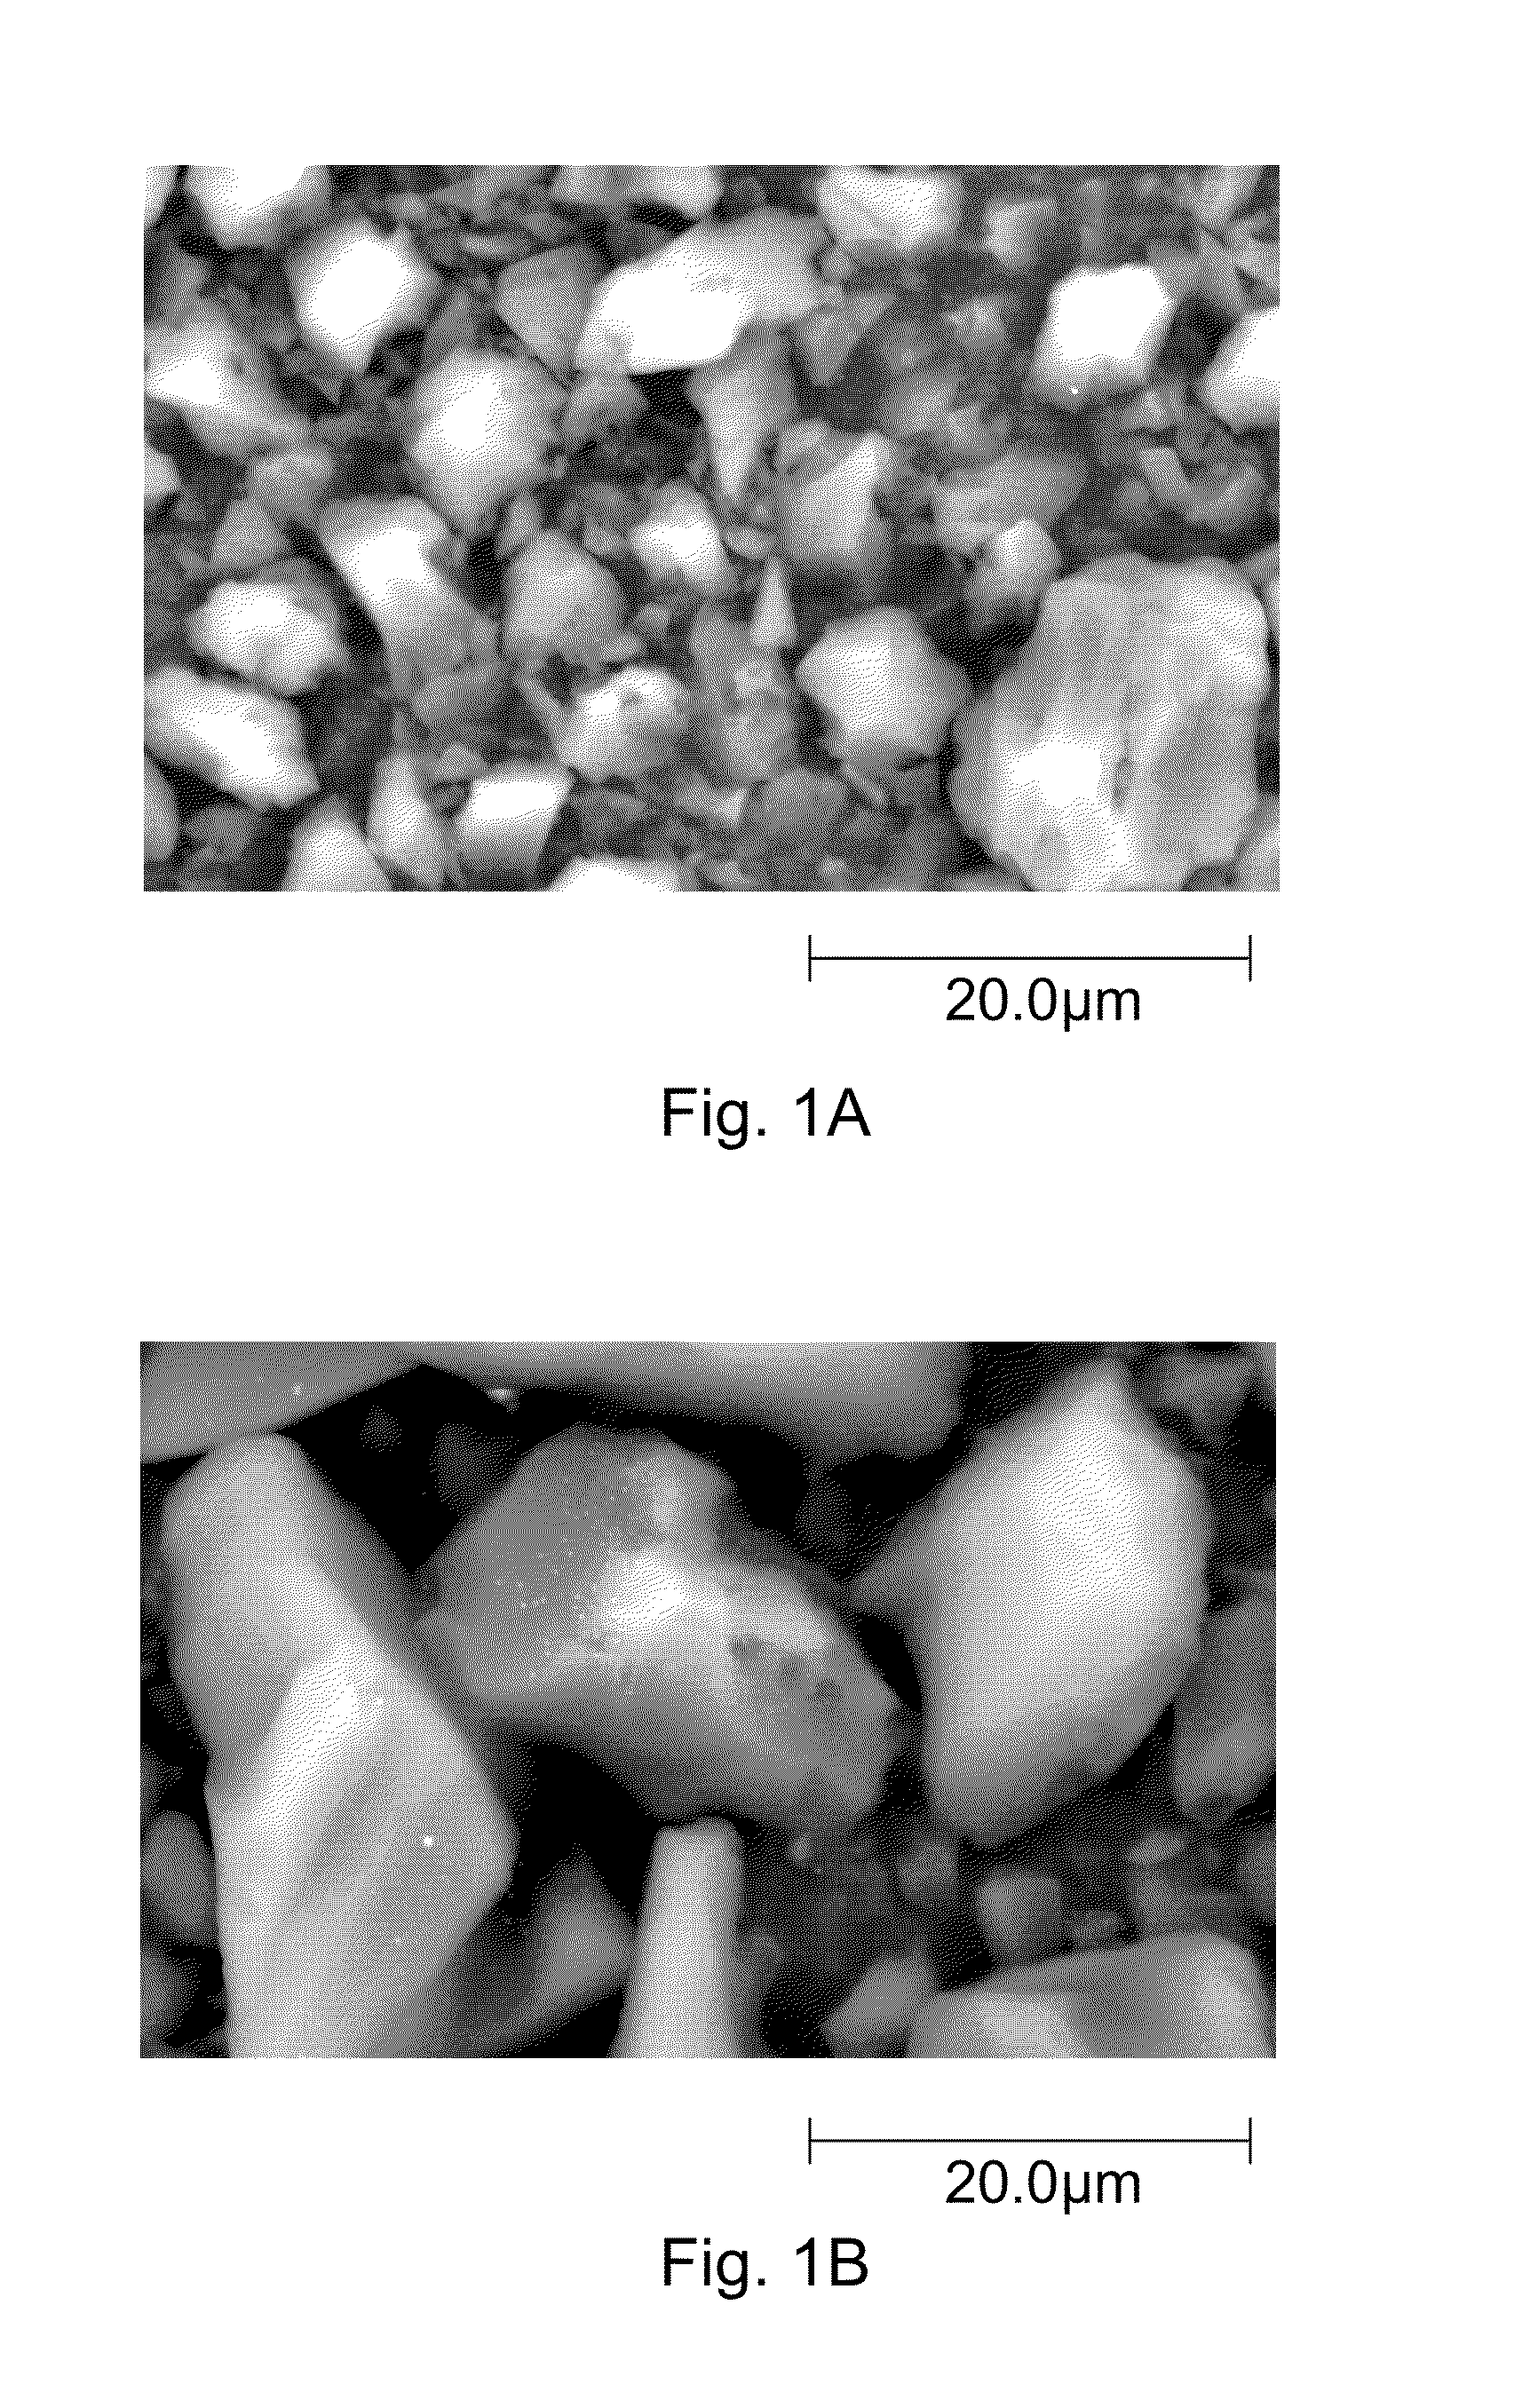 Methods For Forming Activated Carbon Material For High Energy Density Ultracapacitors